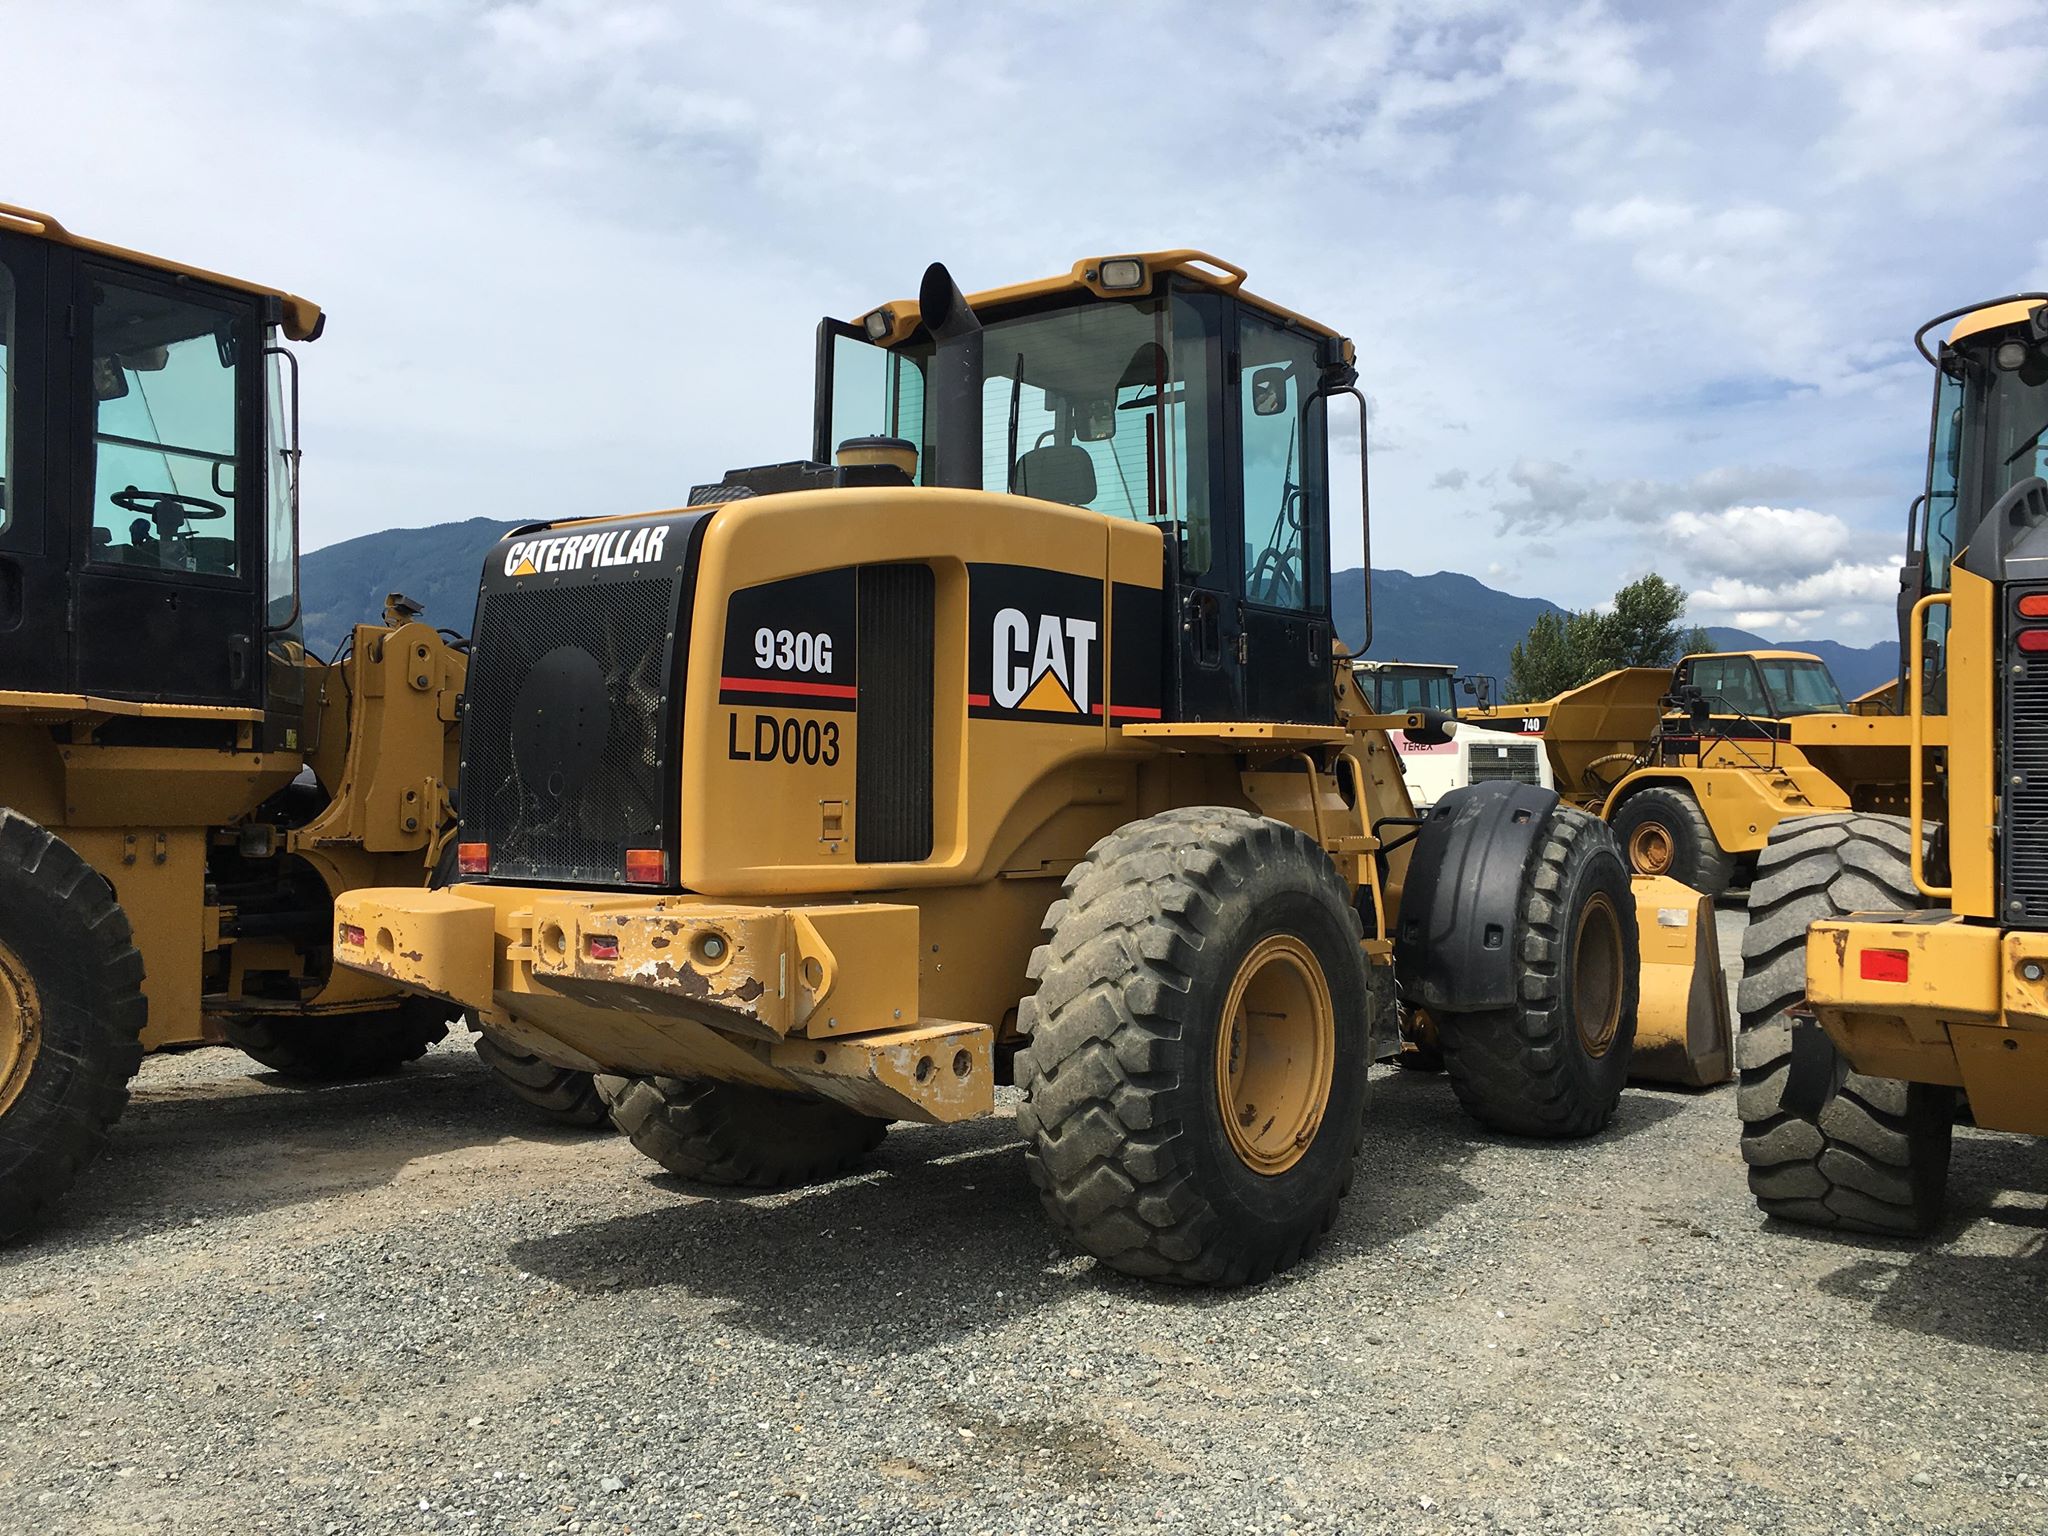 Cat Wheel Loader 928H Decal Packages